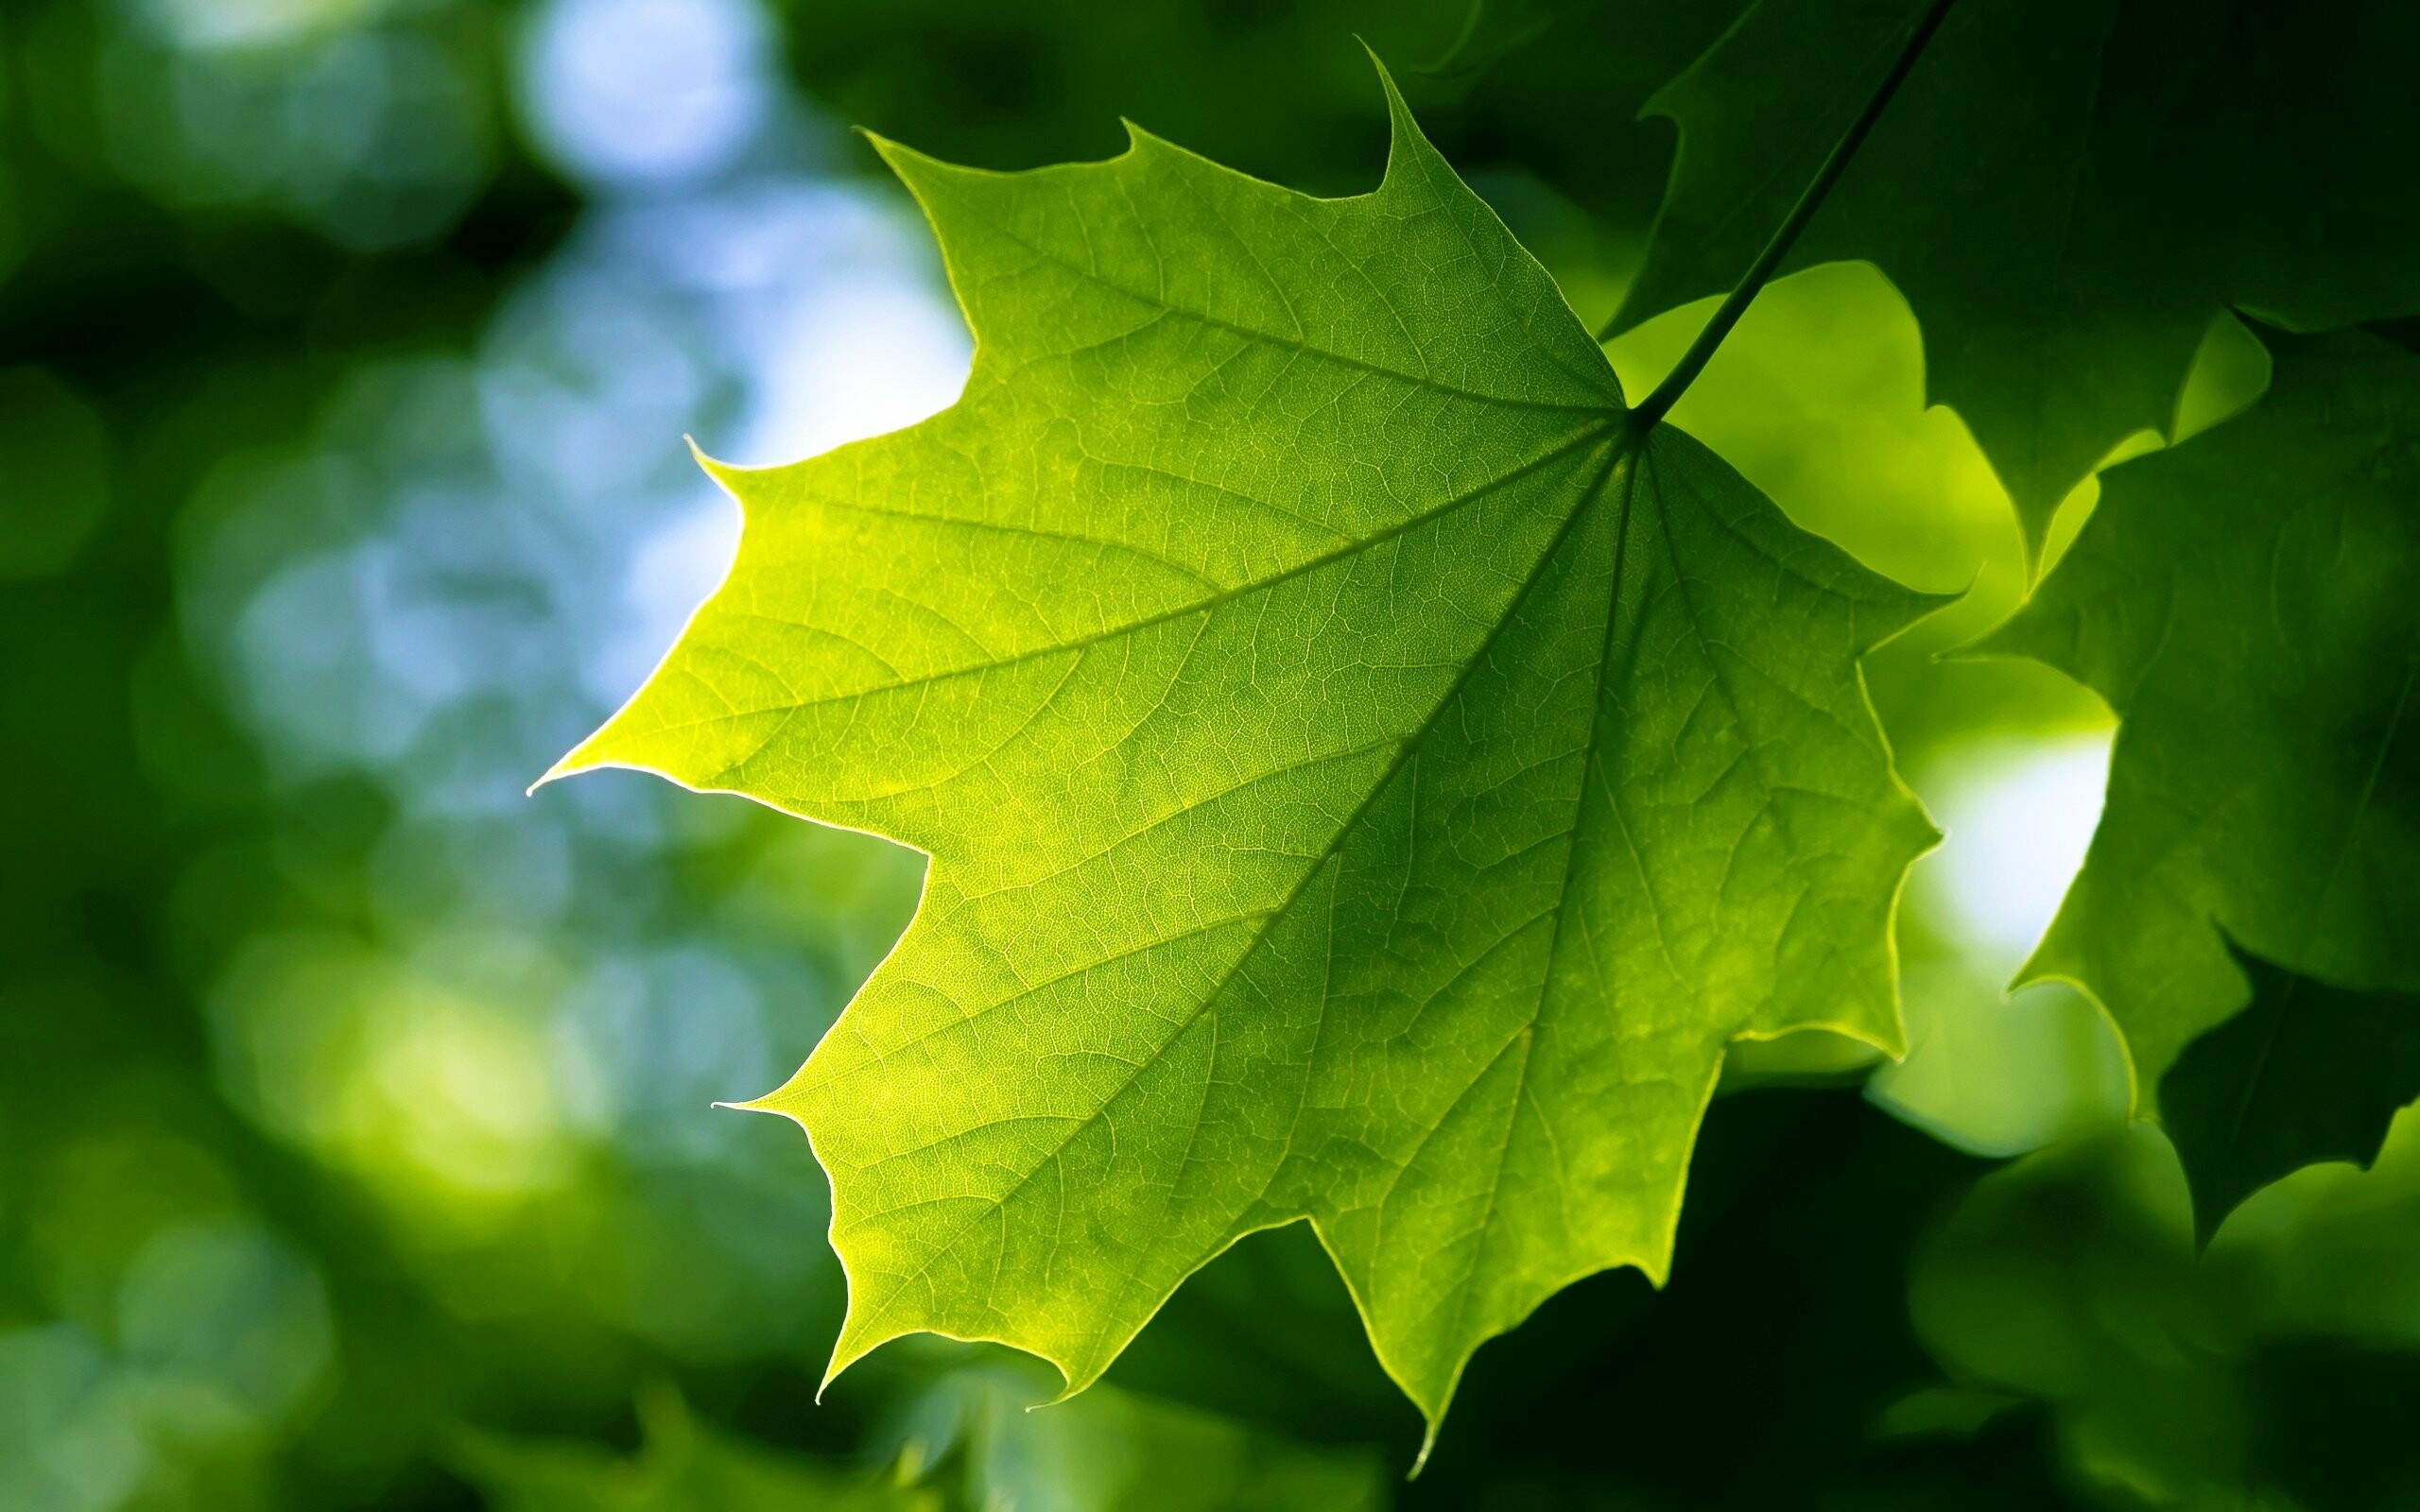 Leaf: Large surface area provides a large area for capture of sunlight. 2560x1600 HD Wallpaper.